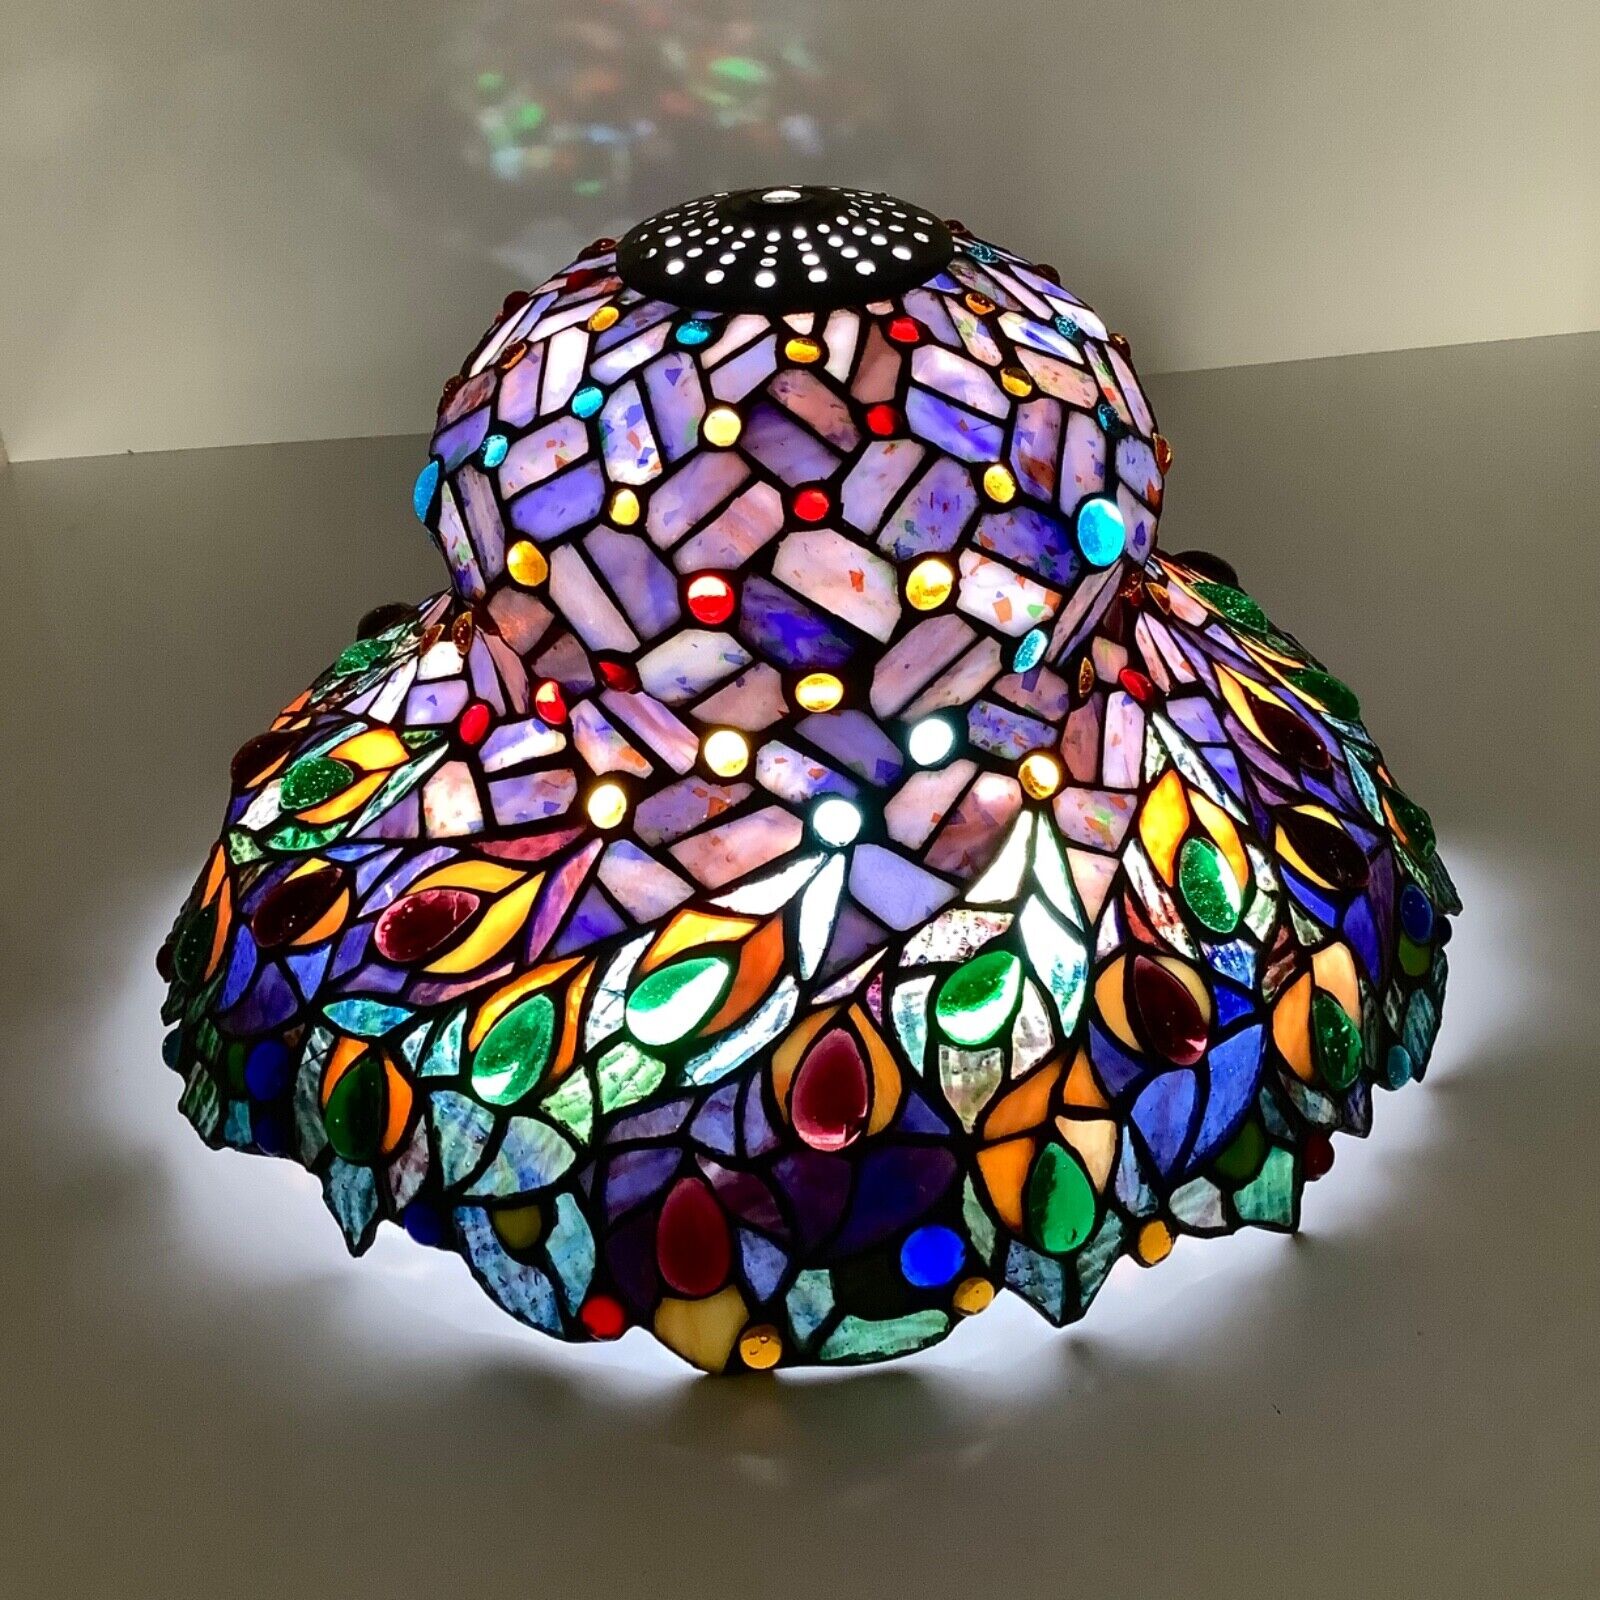 Large Floral & Beaded Stained Glass Lamp Shade 16”W x 10”H Unique Bell Shape